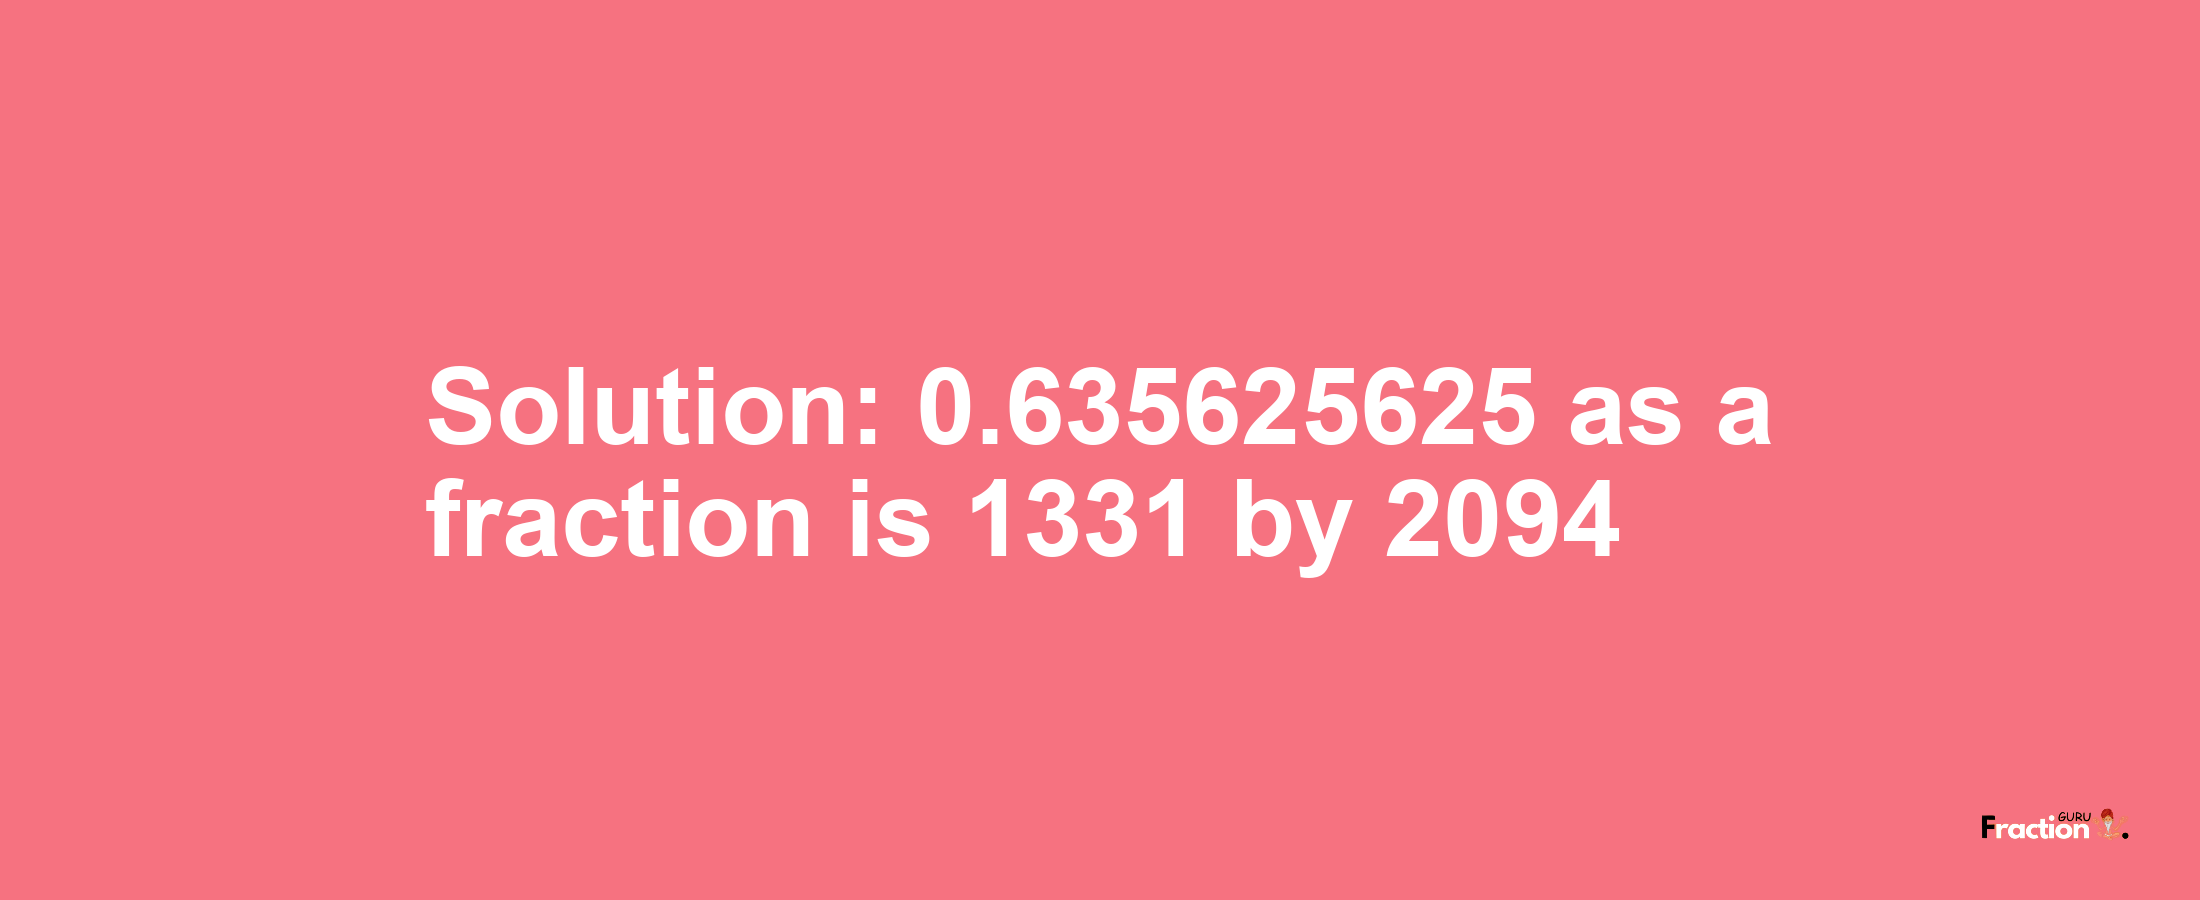 Solution:0.635625625 as a fraction is 1331/2094